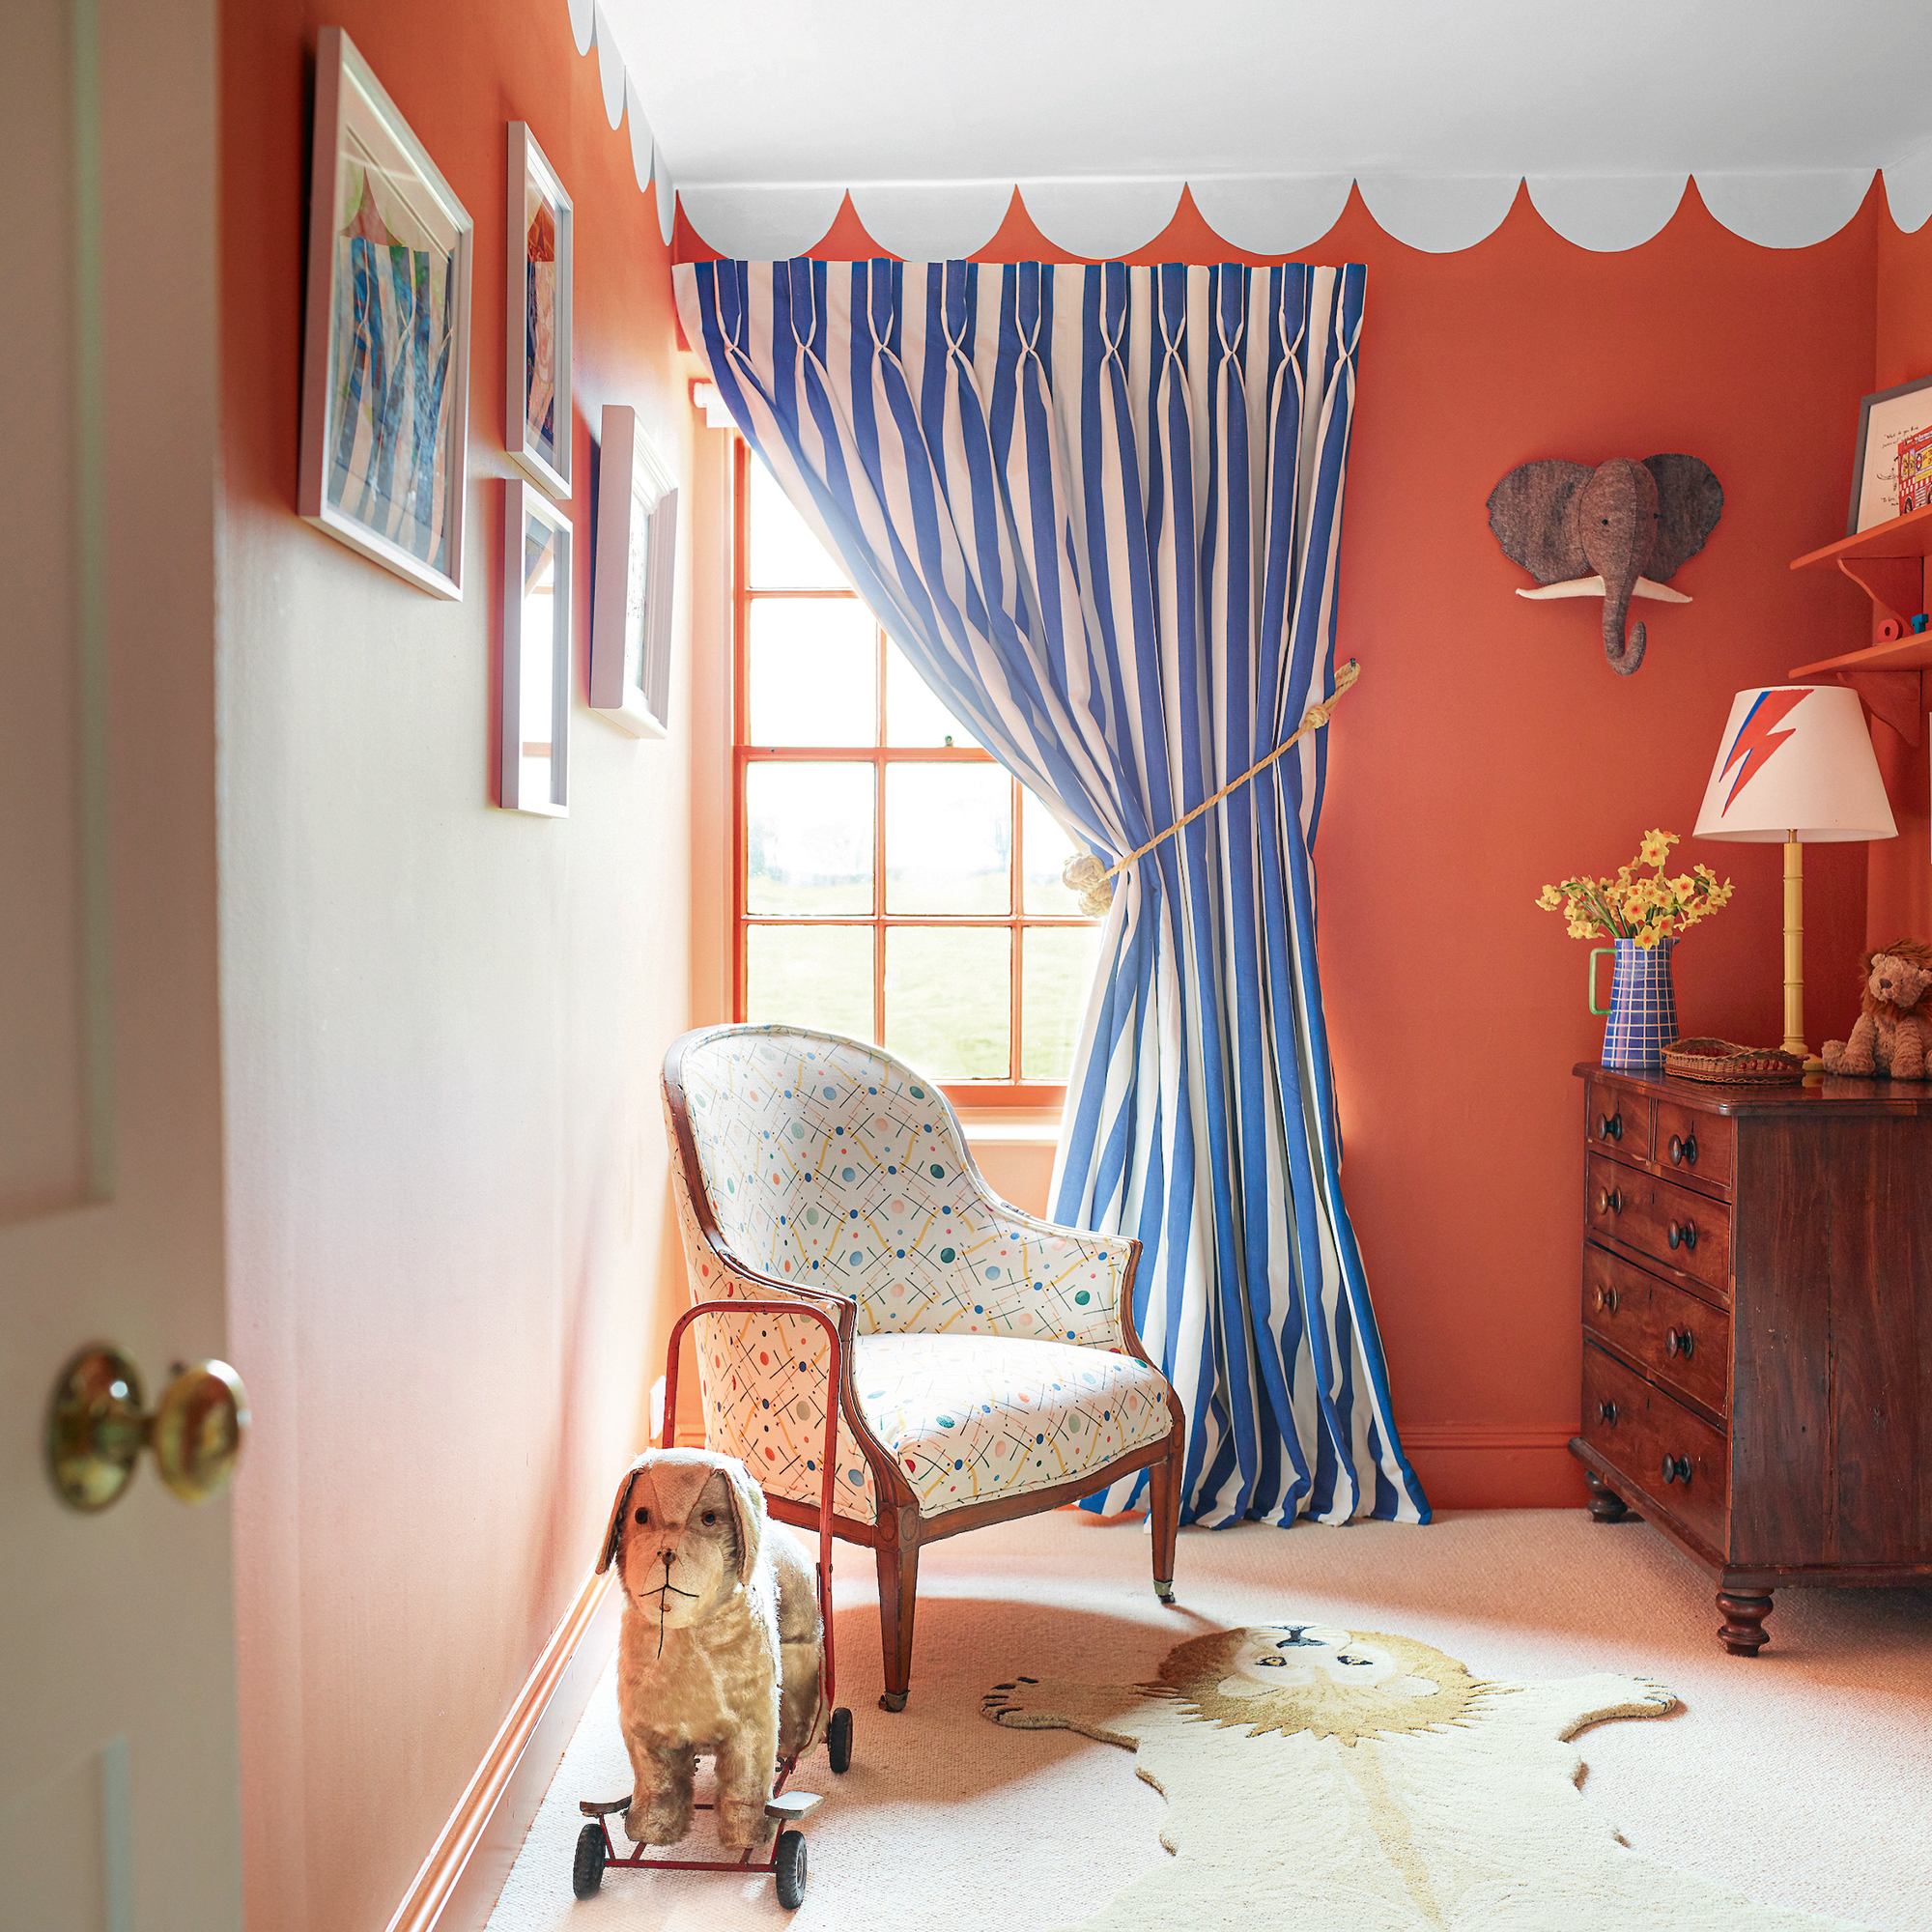 childrens bedroom with orange walls, pelmet paint detail at top and circs theme